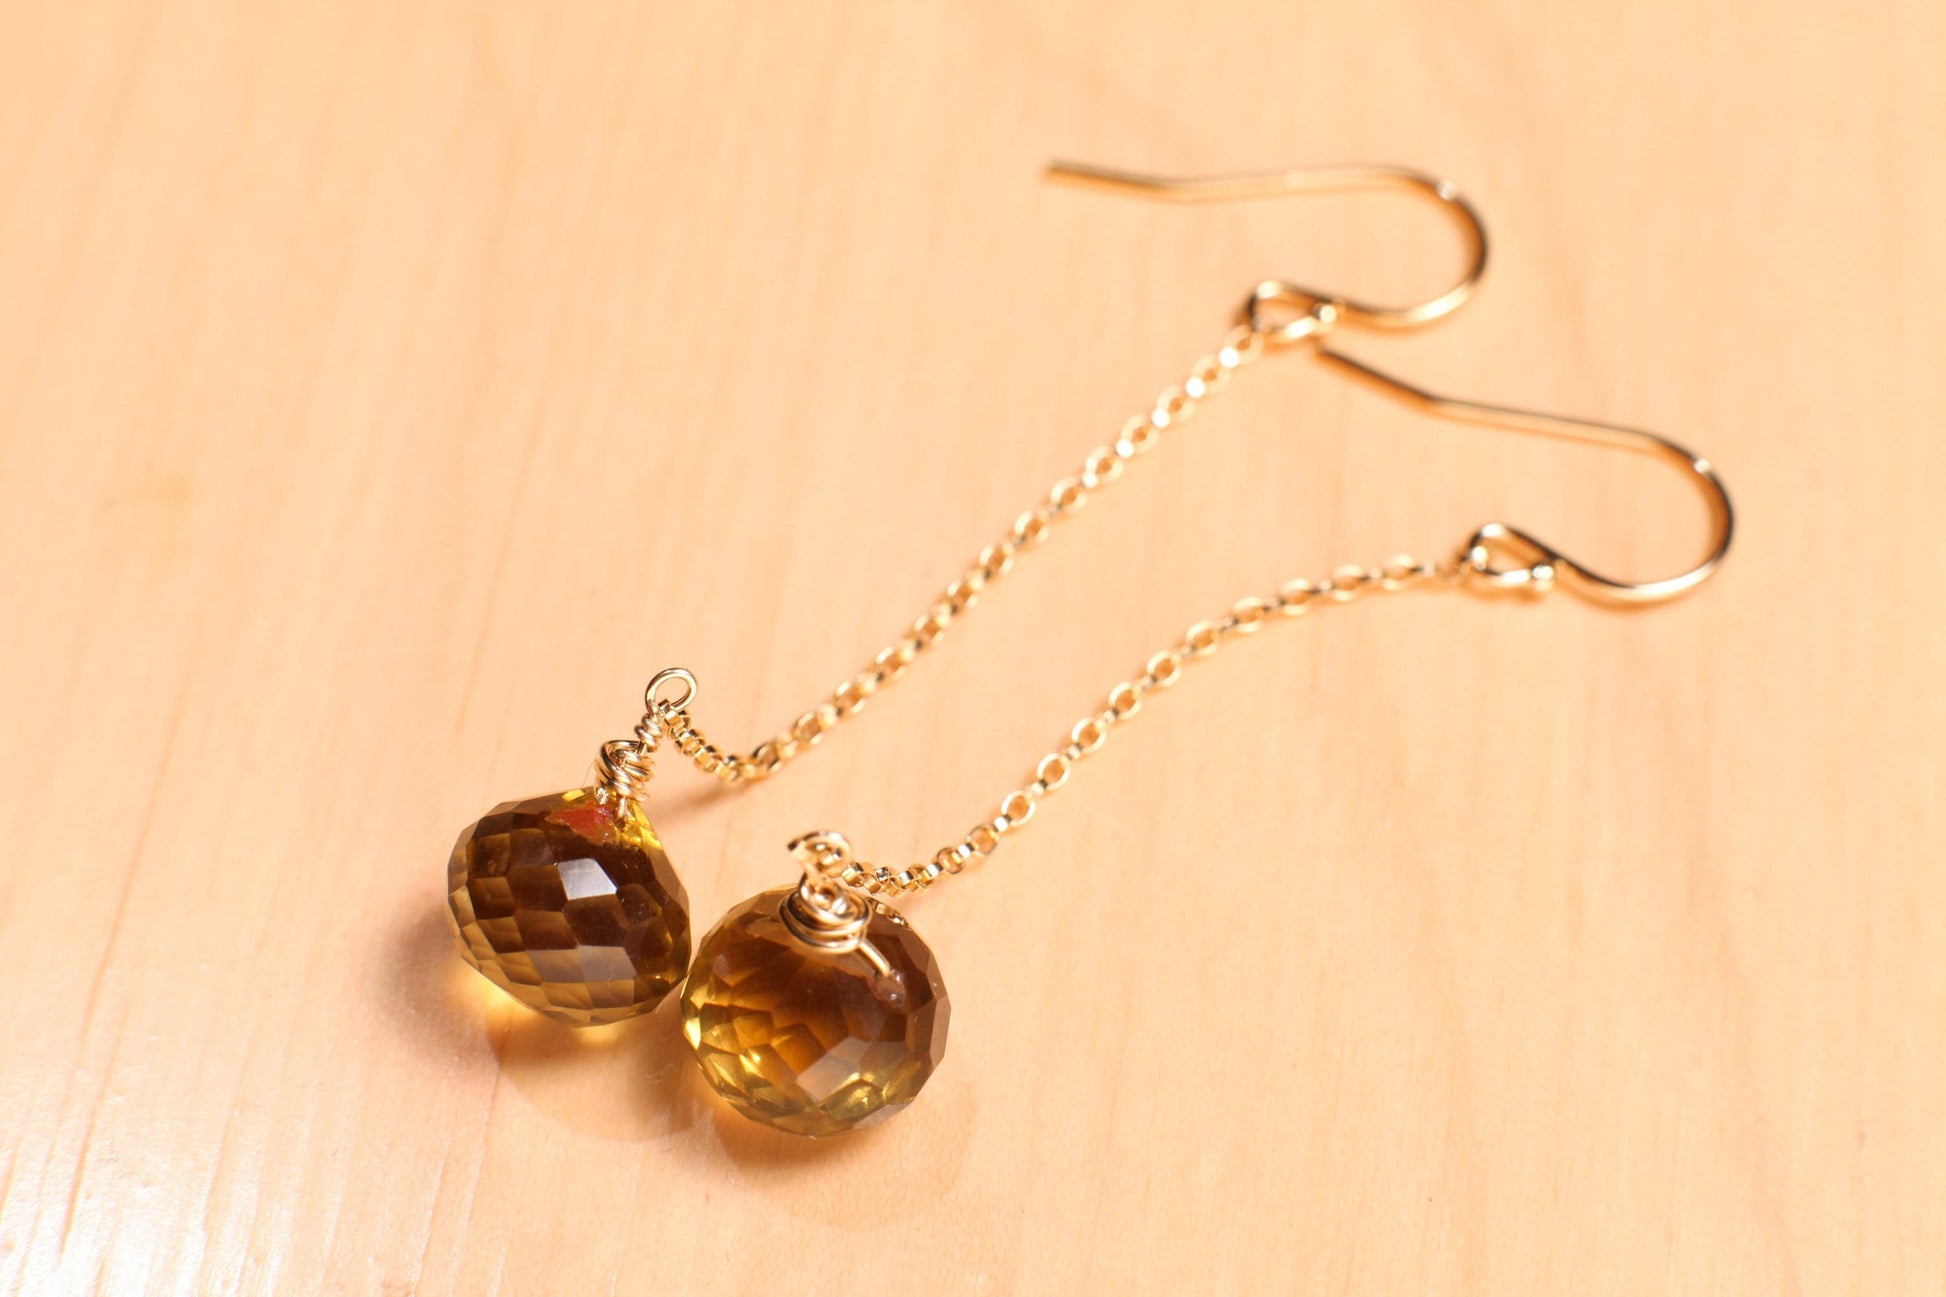 Whiskey Quartz 9x10mm Onion Shape Wire Wrapped Briolette Dangle with 14K Gold Filled Chain and Earwire, Gemstone Handmade Earrings Gift